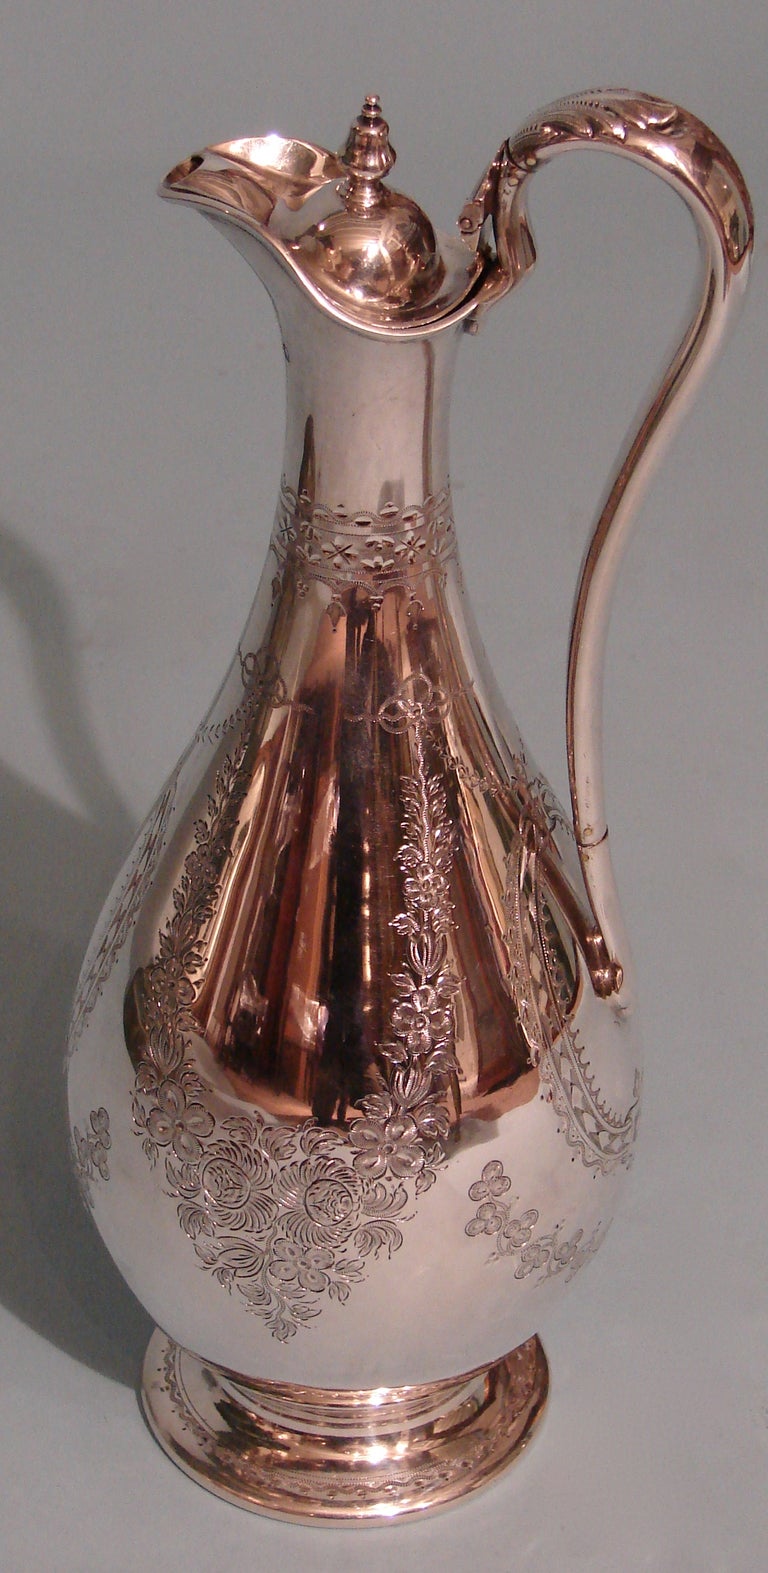 A good sterling claret jug of elegant pear form design, with a long slender neck ending in a collared rim.  Interior gilded. Made by Martin Hall & Co., Sheffield, 1868. Weight 22.78 troy oz.